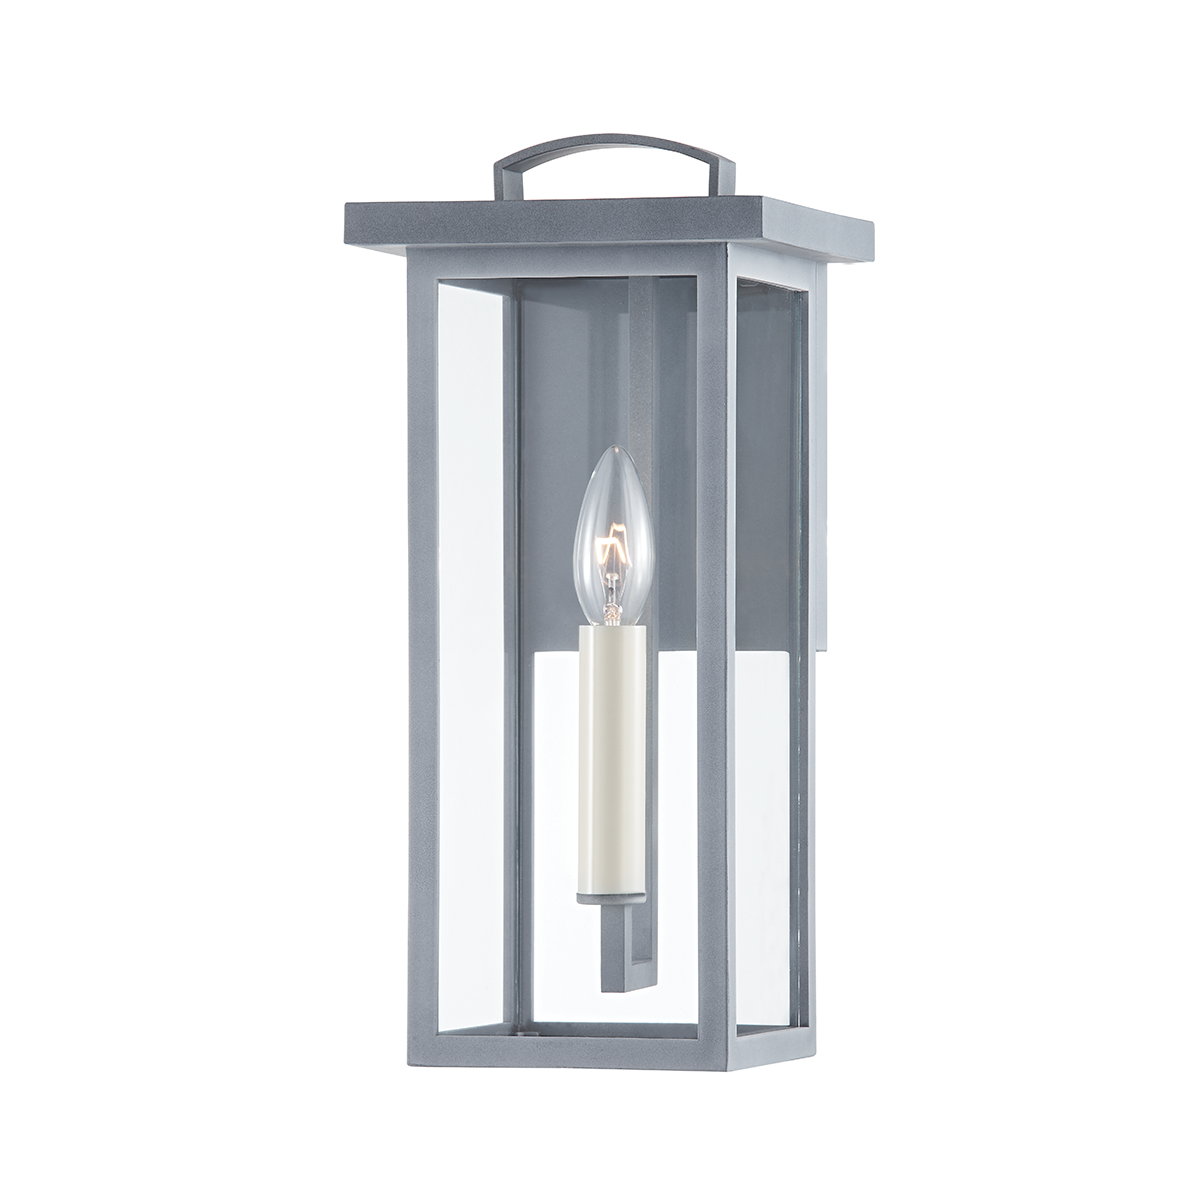 Troy Lighting 1 LIGHT SMALL EXTERIOR WALL SCONCE B7521 Outdoor l Wall Troy Lighting WEATHERED ZINC  